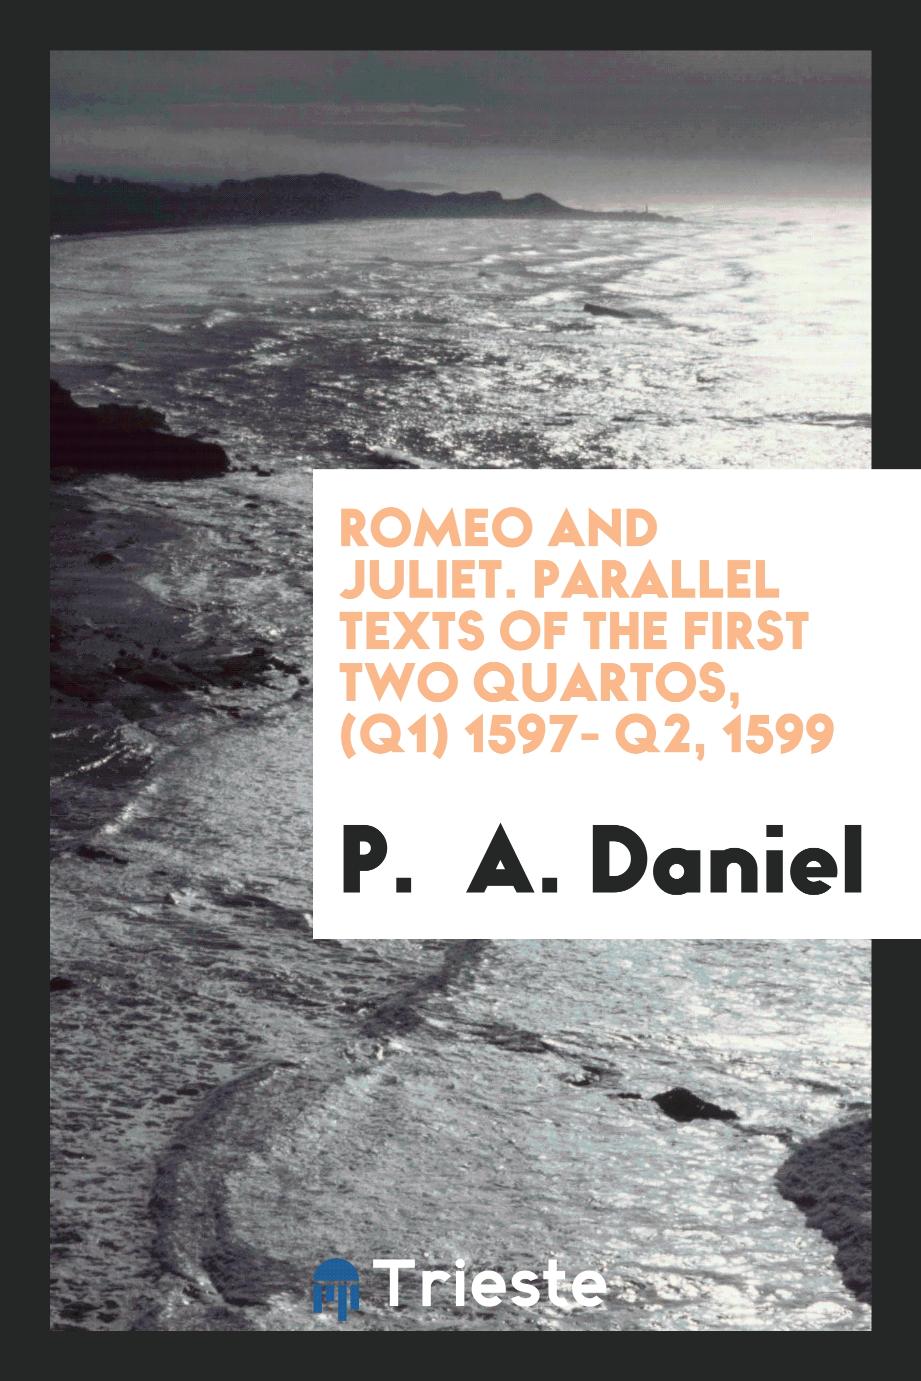 Romeo and Juliet. Parallel Texts of the First Two Quartos, (Q1) 1597- Q2, 1599